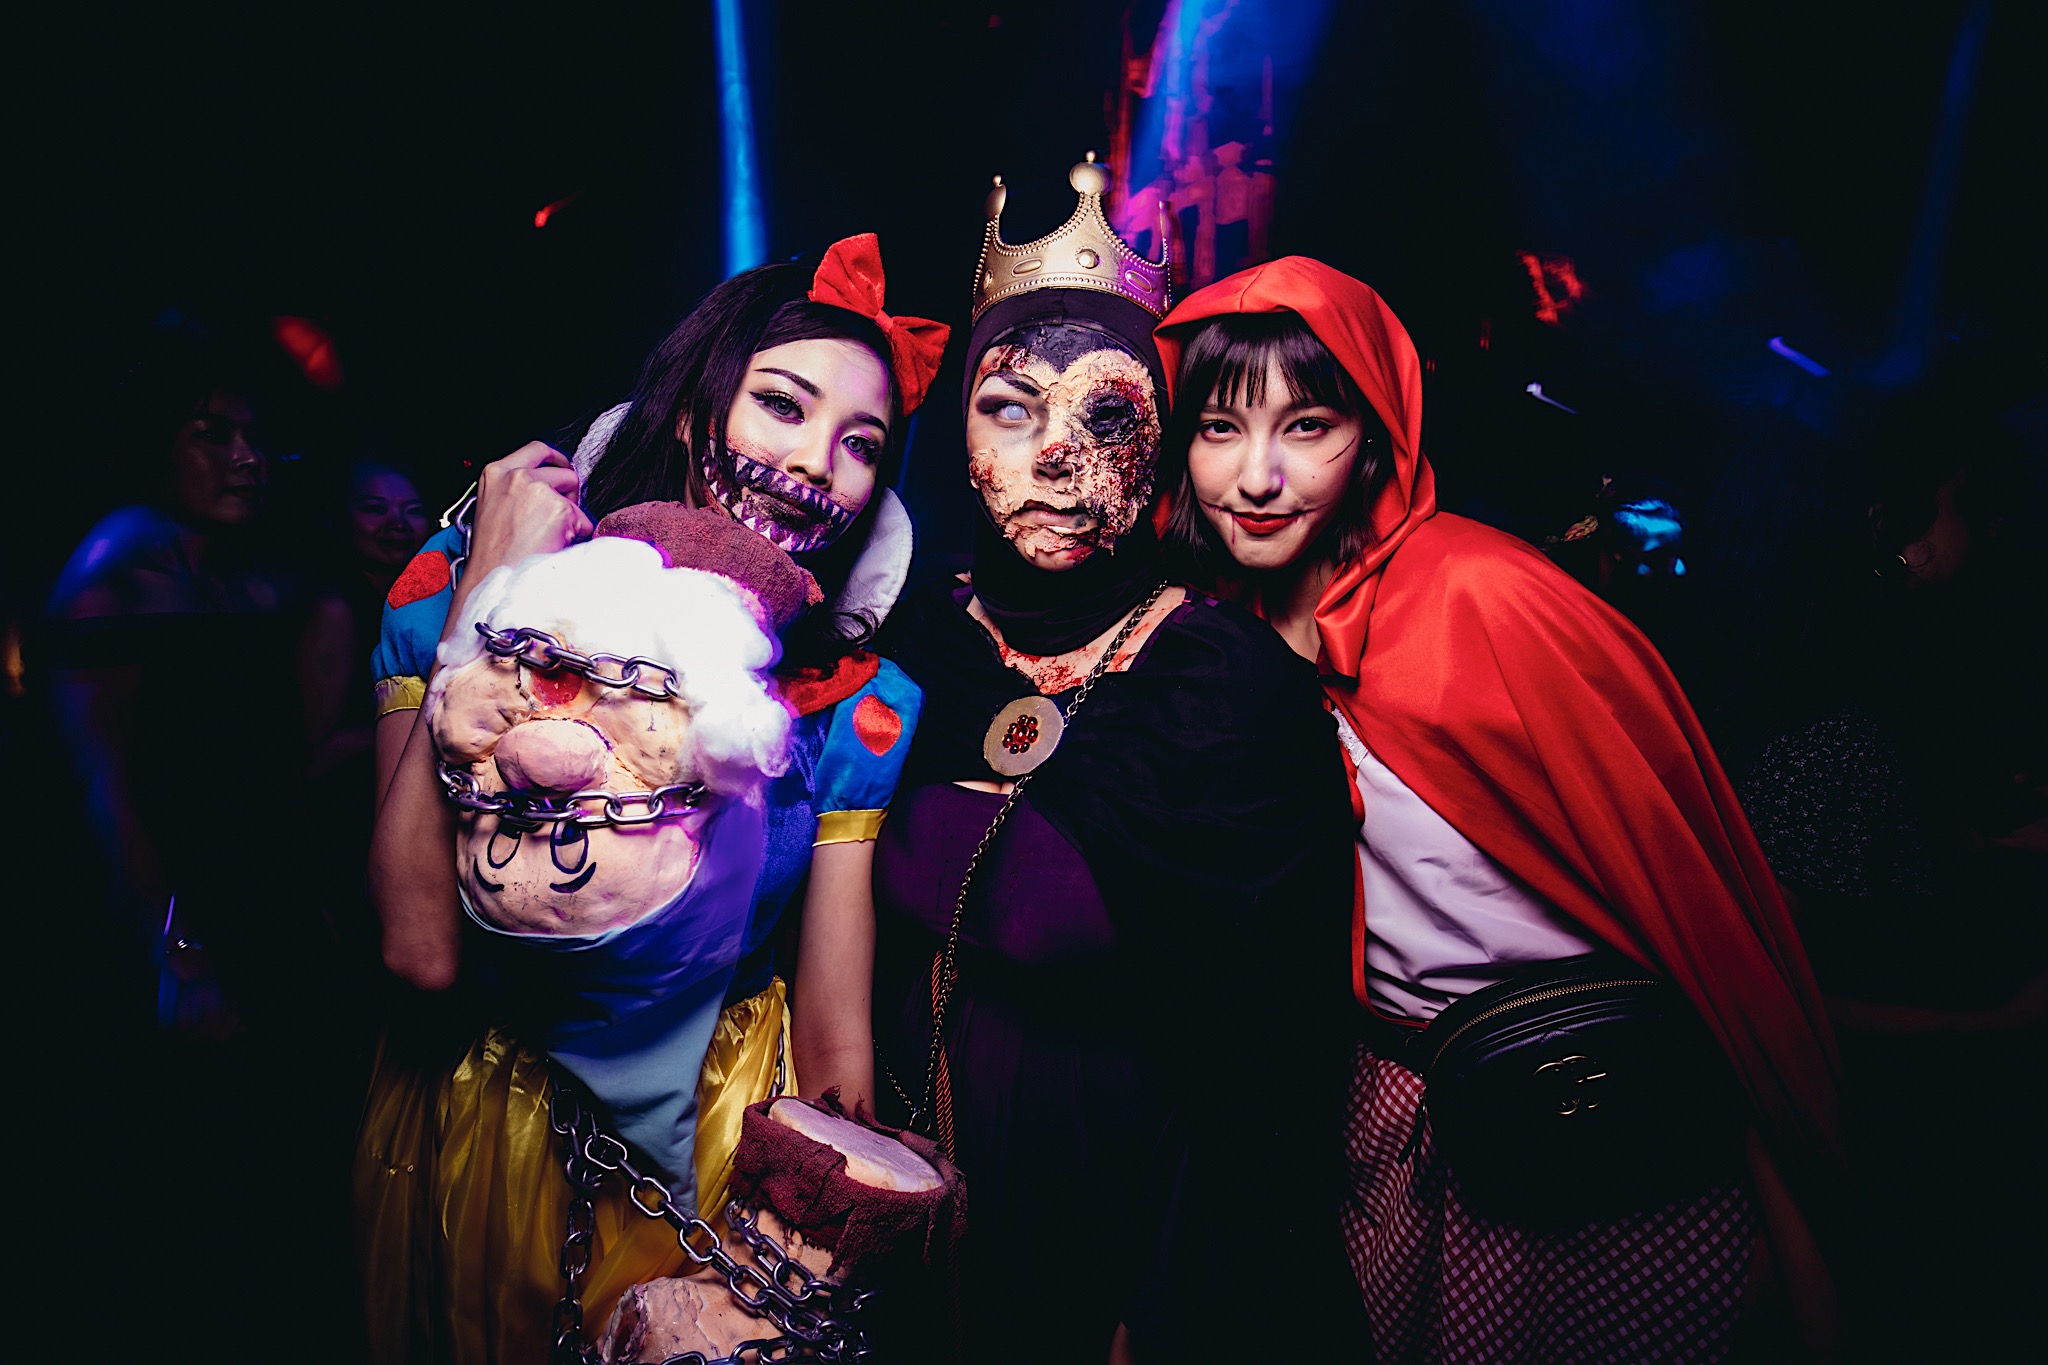 Party-goers at Bar Rouge’s Halloween party. Image: Bar Rouge